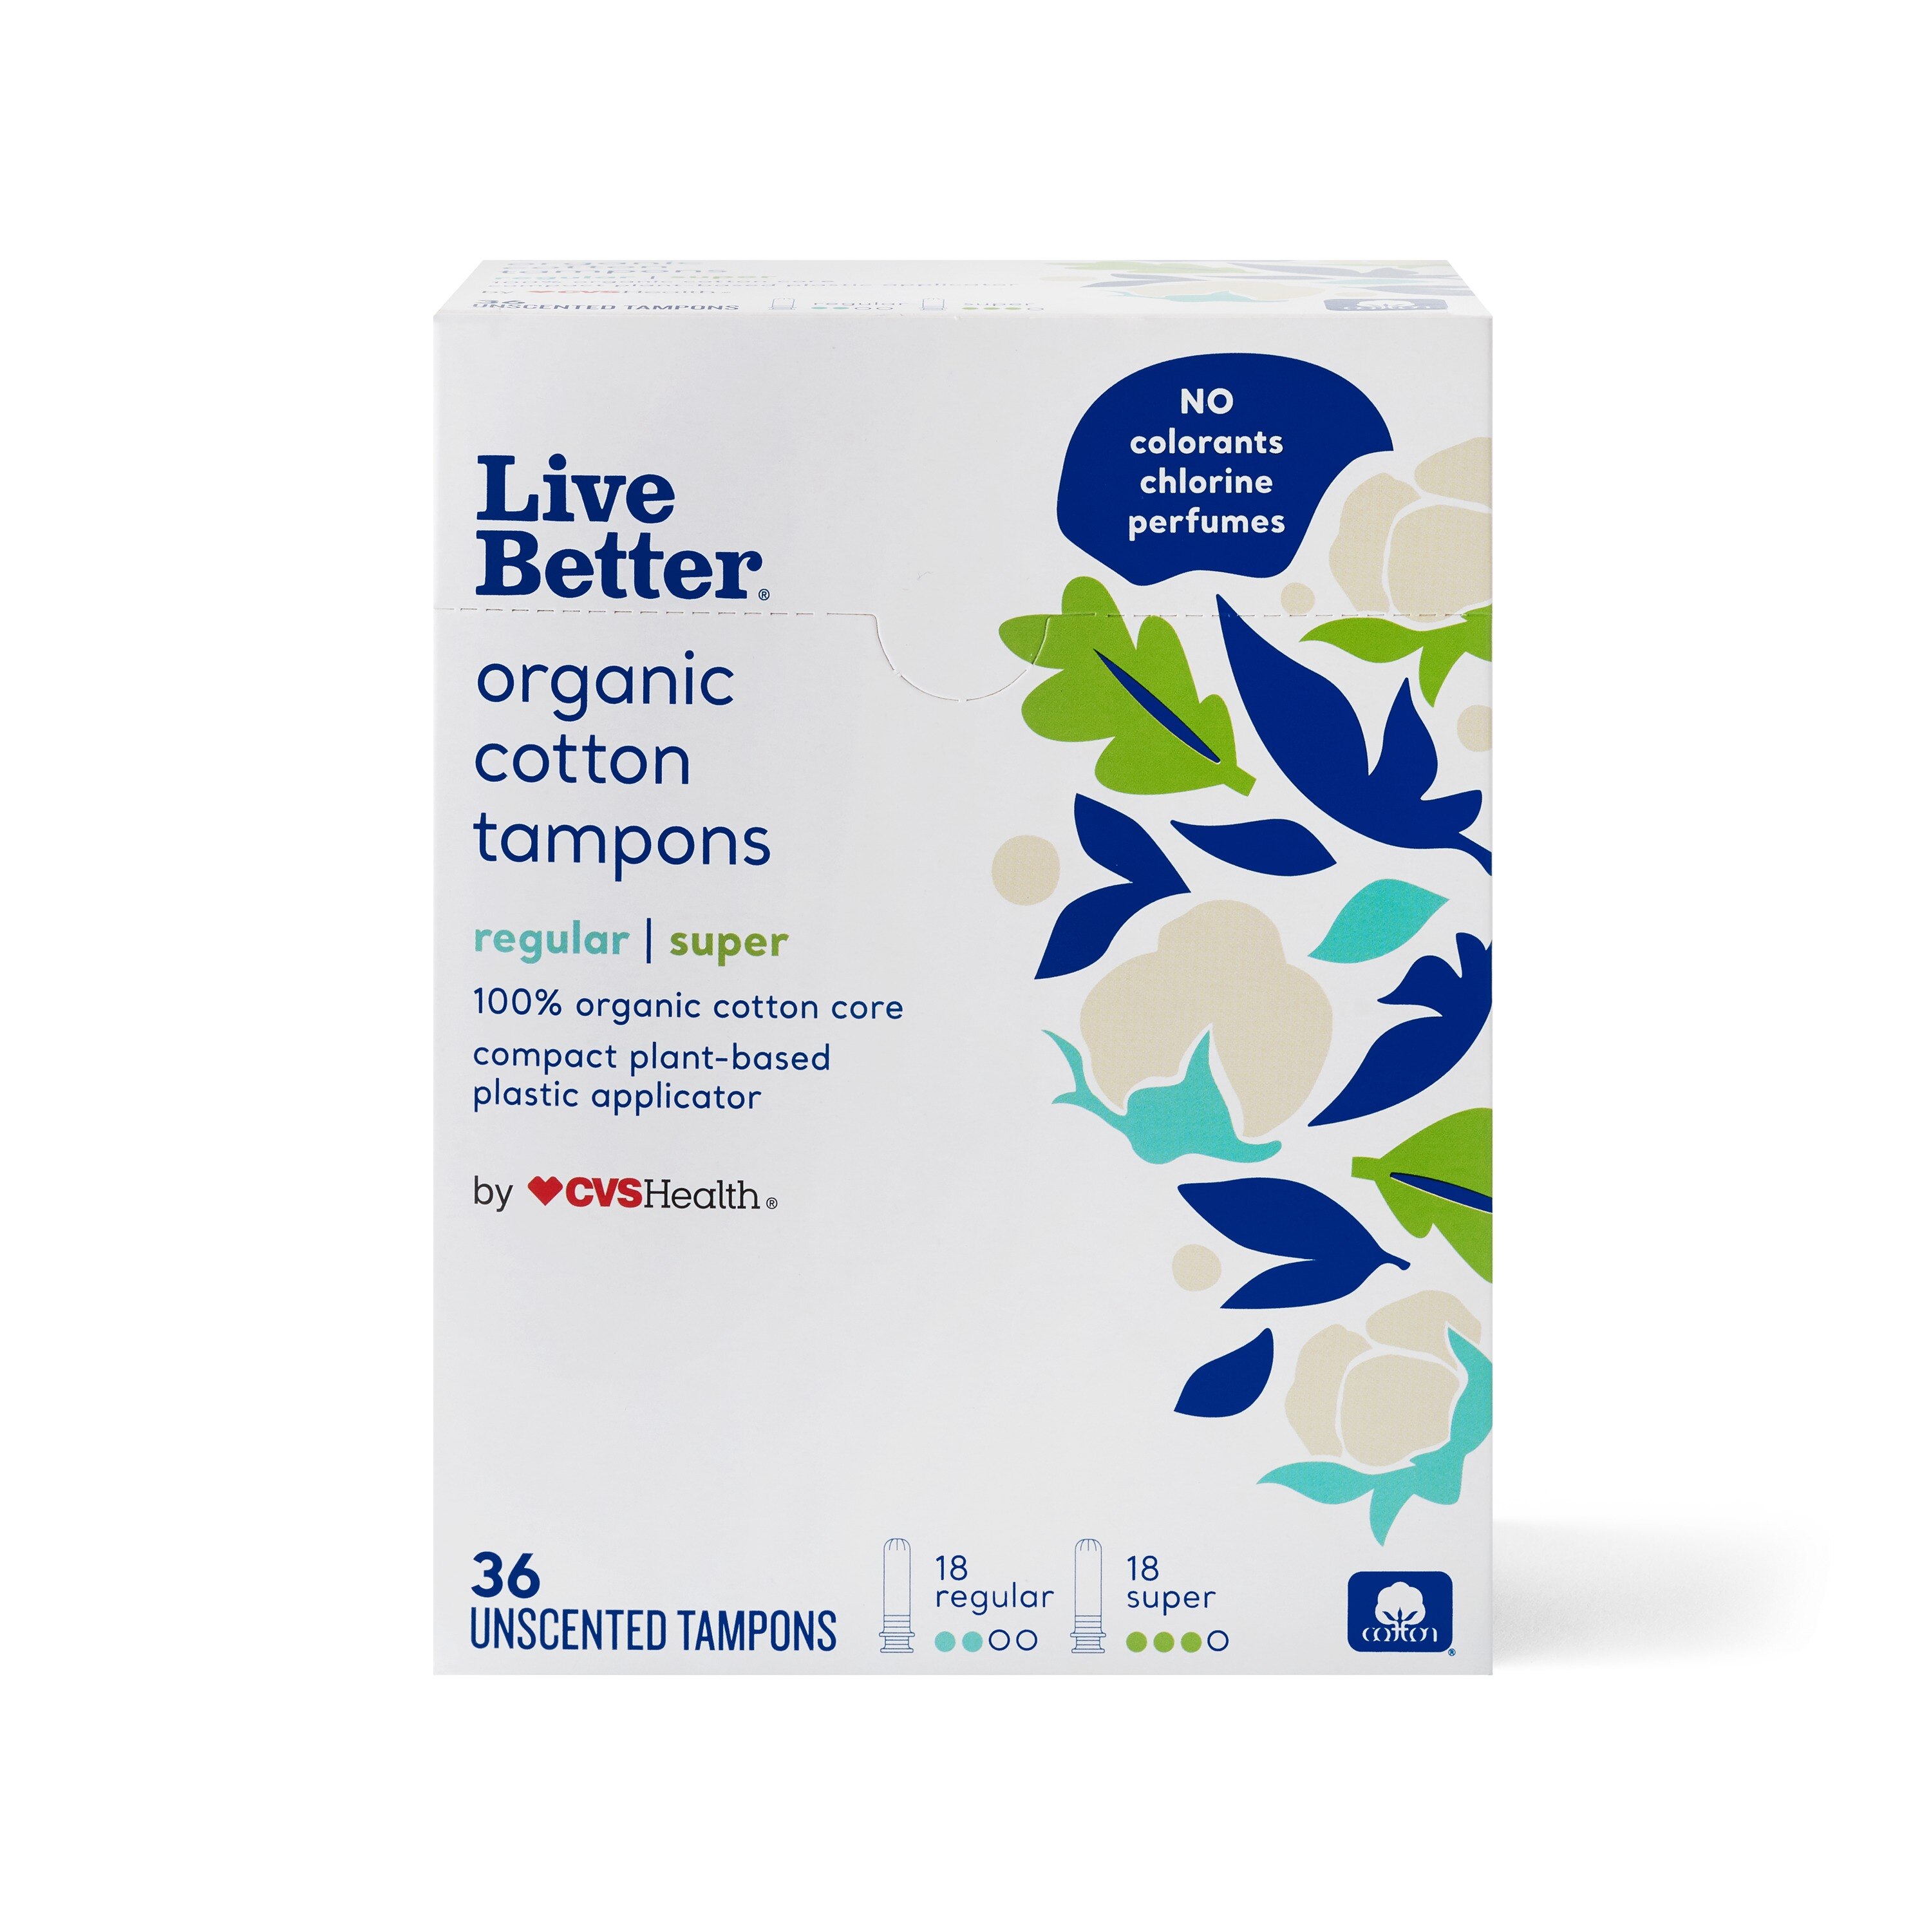 CVS Live Better Organic Cotton Tampons  with Compact Plant-Based Plastic Applicator, Regular & Super, 36 CT